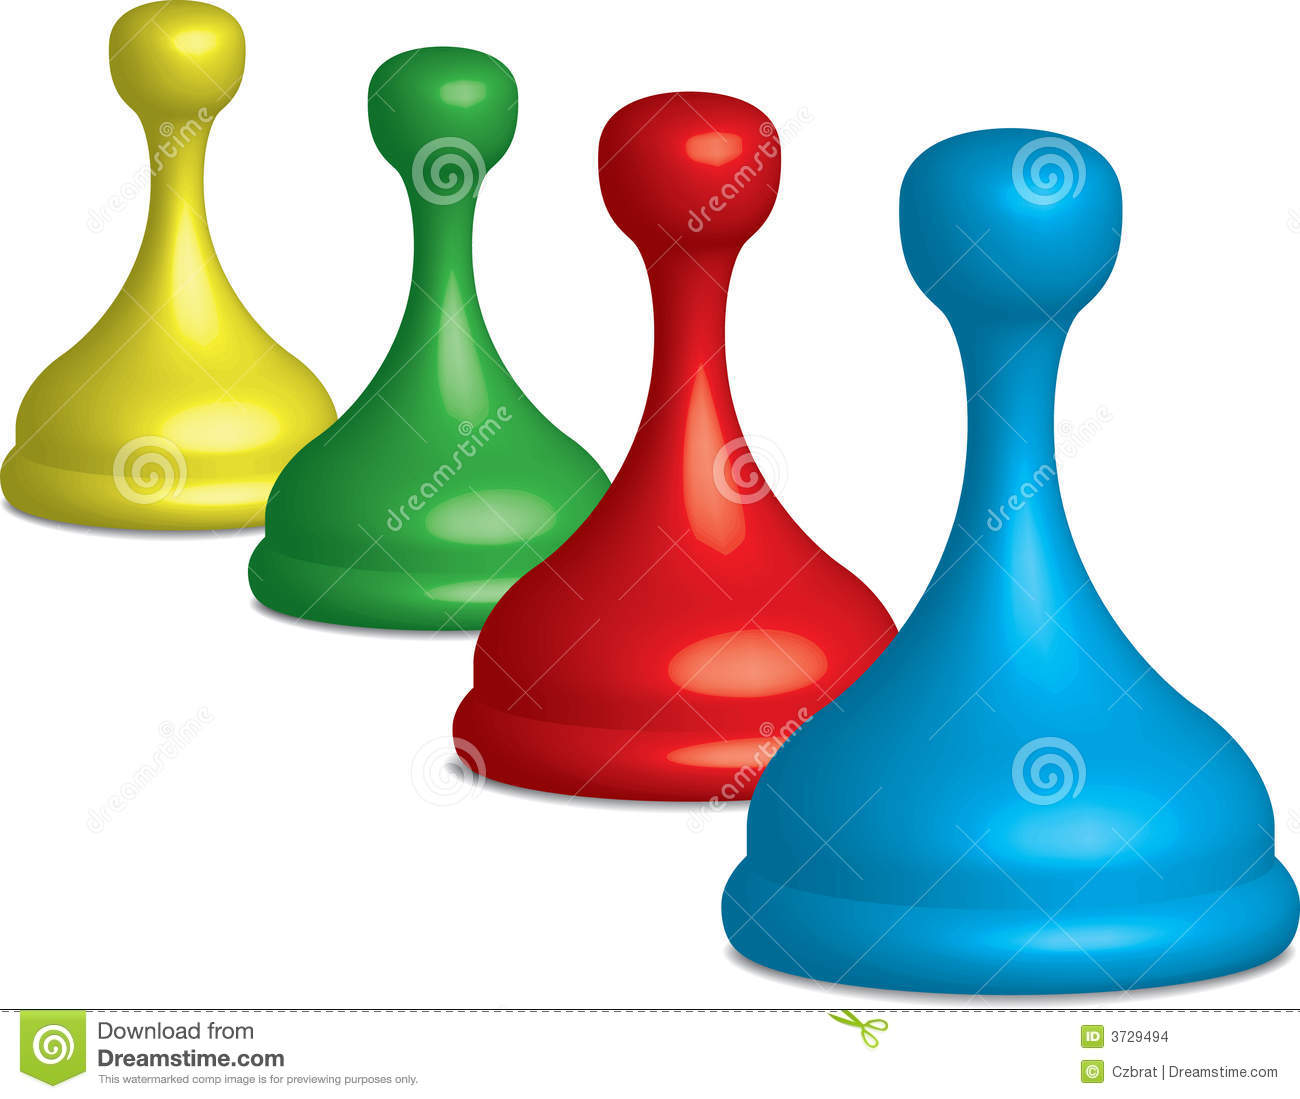 3d Render Of A Plastic Game Pieces  Vector Image Is Included